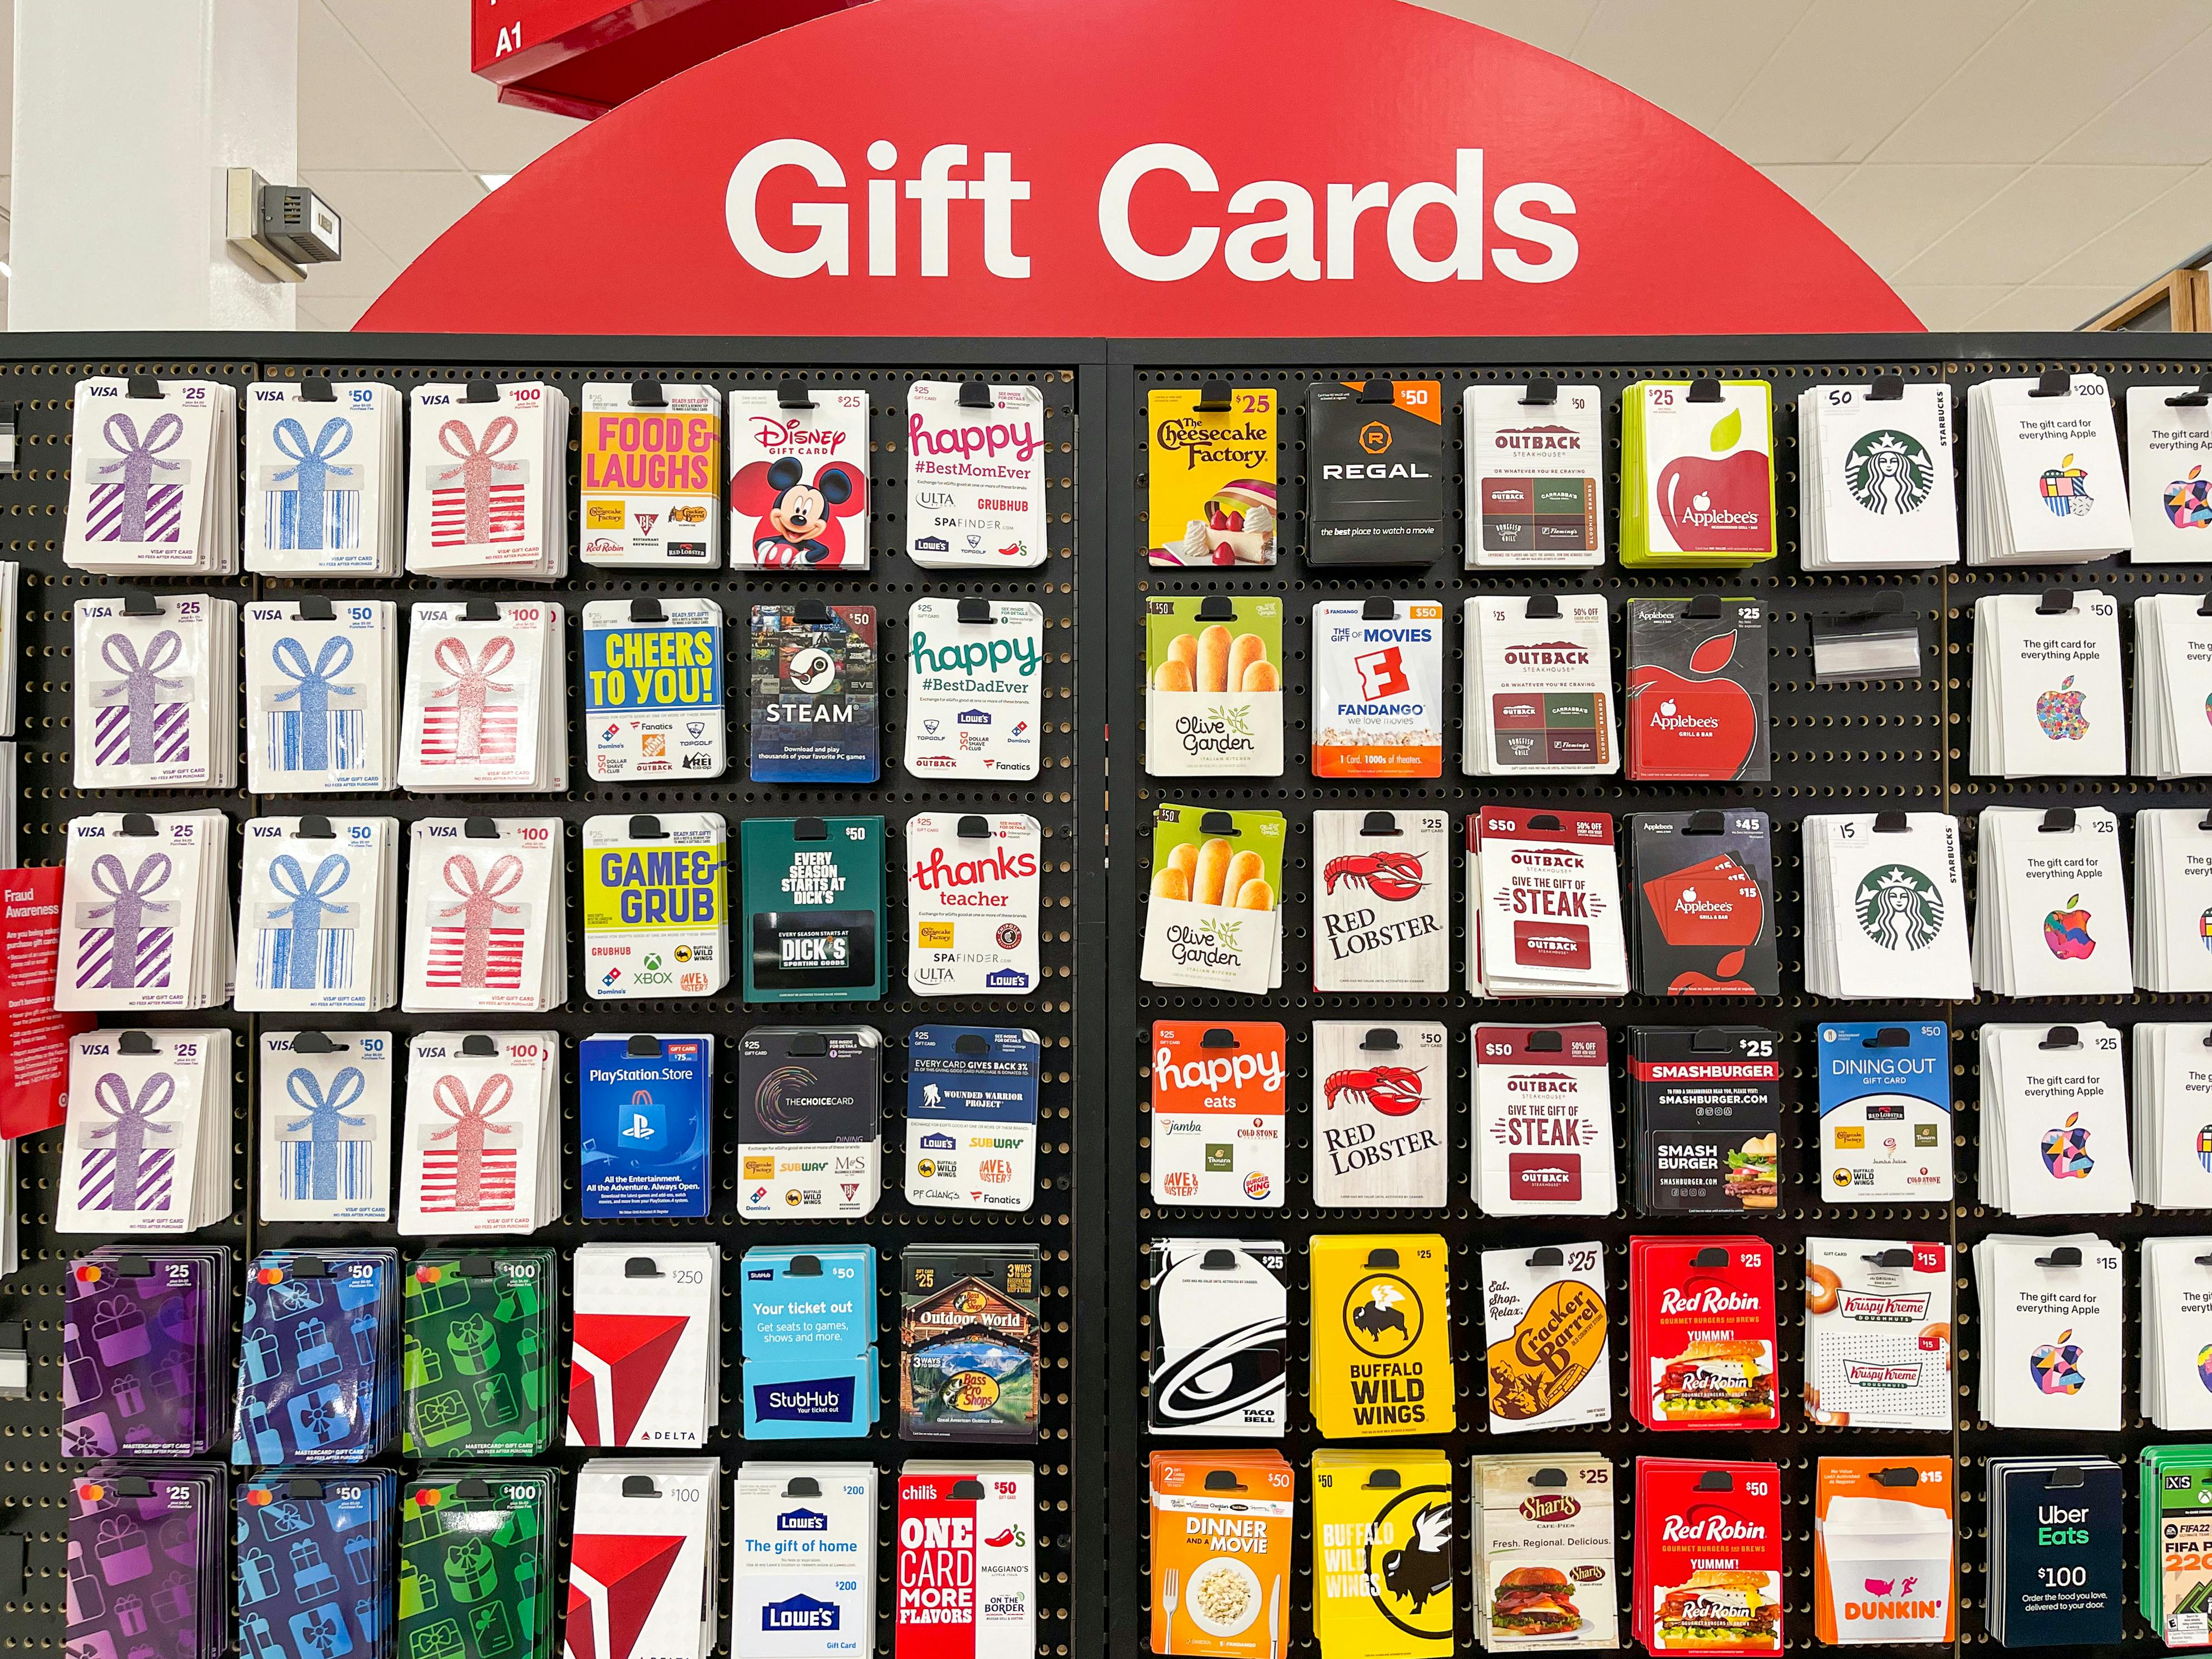 What Store Sells Amazon Gift Cards?